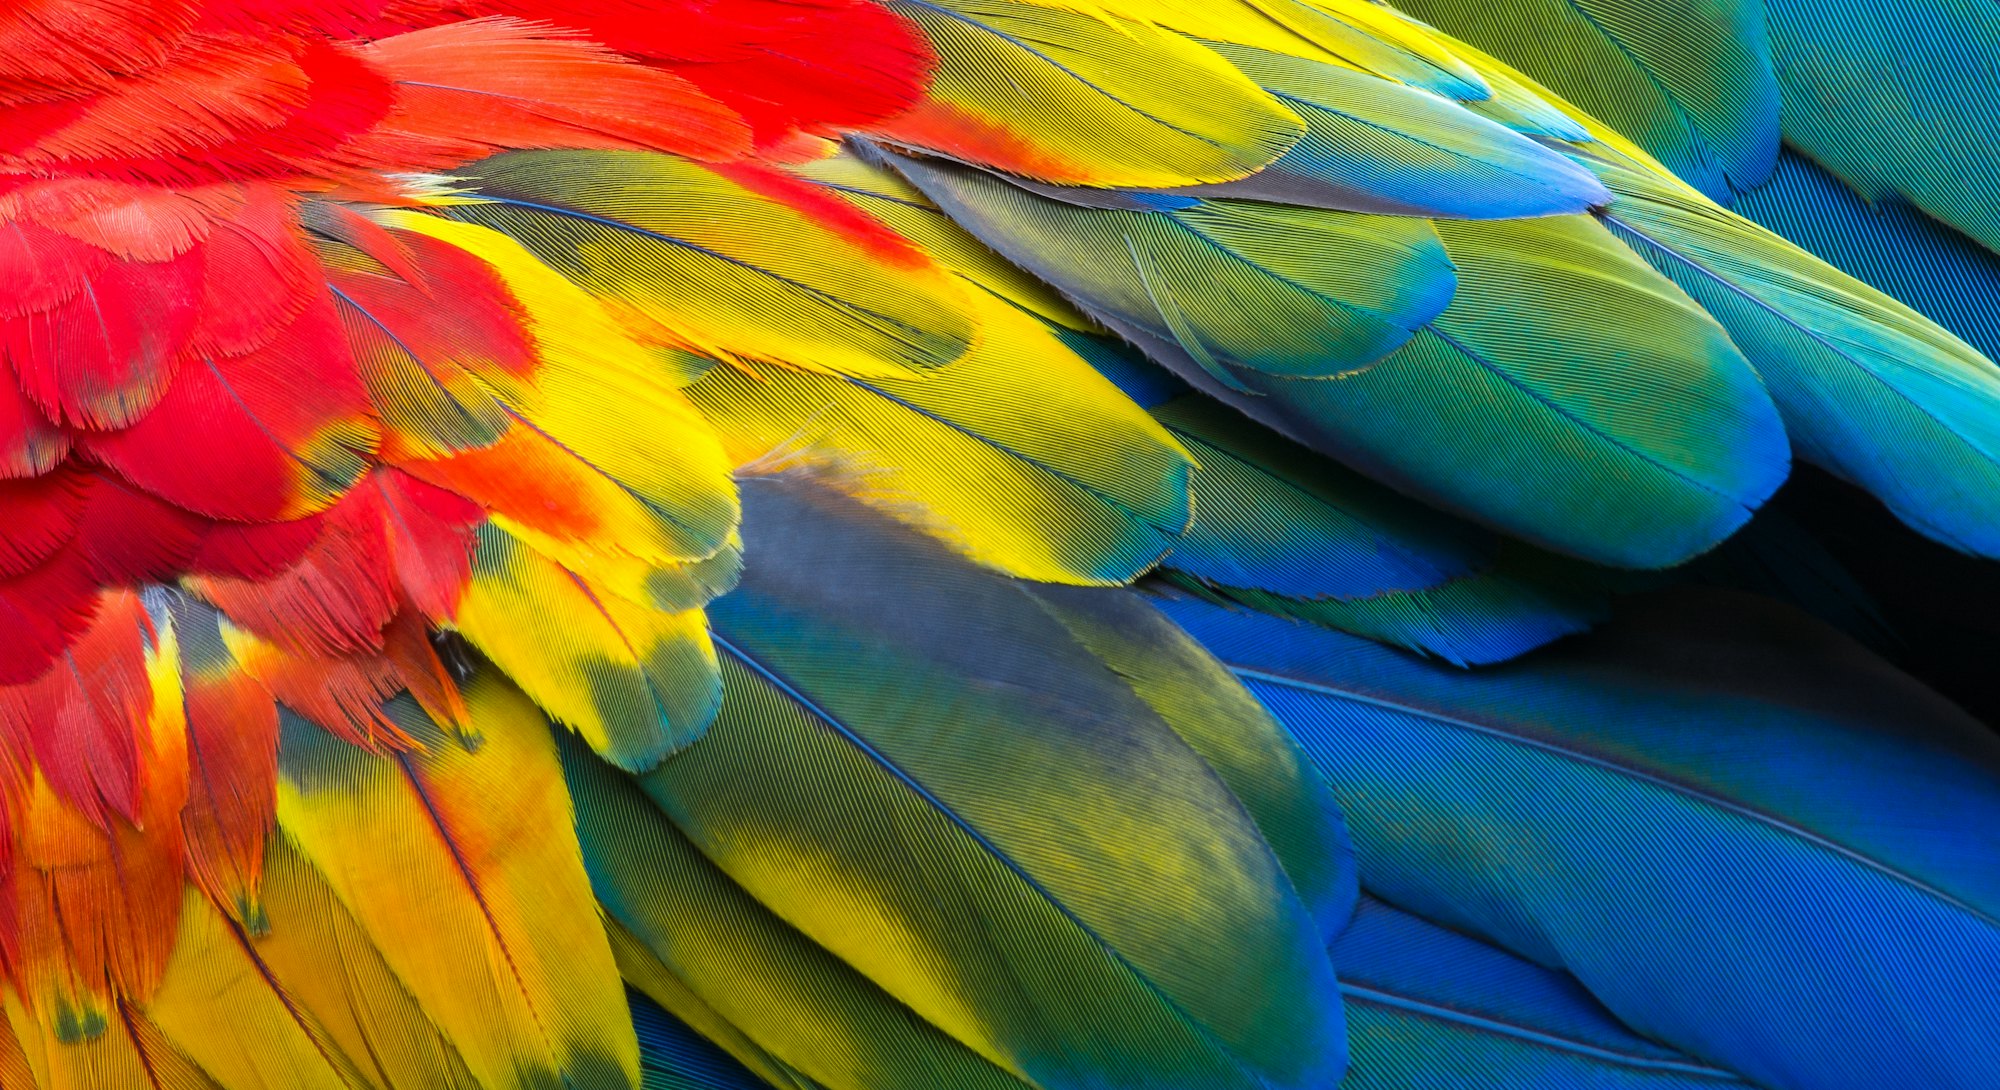 Close up of Scarlet macaw bird's feathers, exotic nature background and texture.